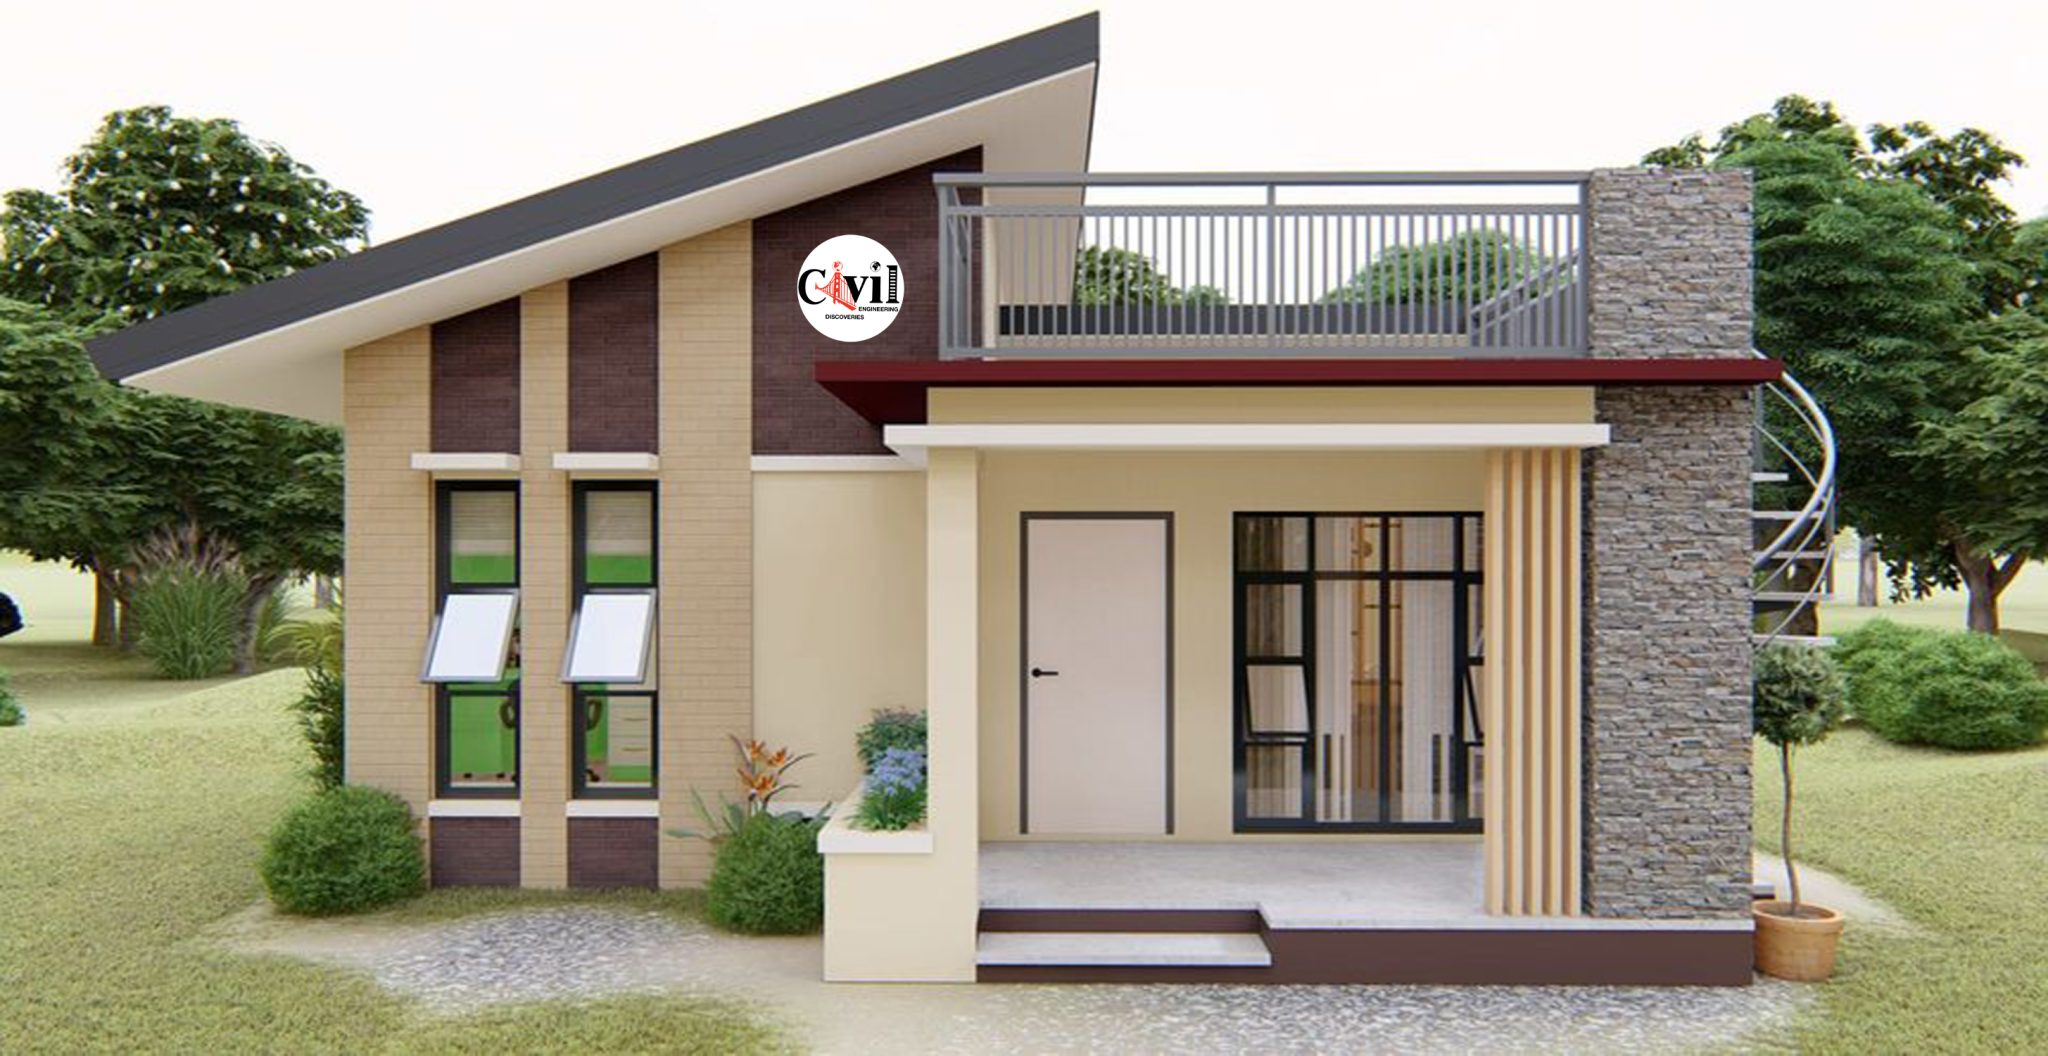 80 SQ.M. Modern Bungalow House Design With Roof Deck 2048x1056 